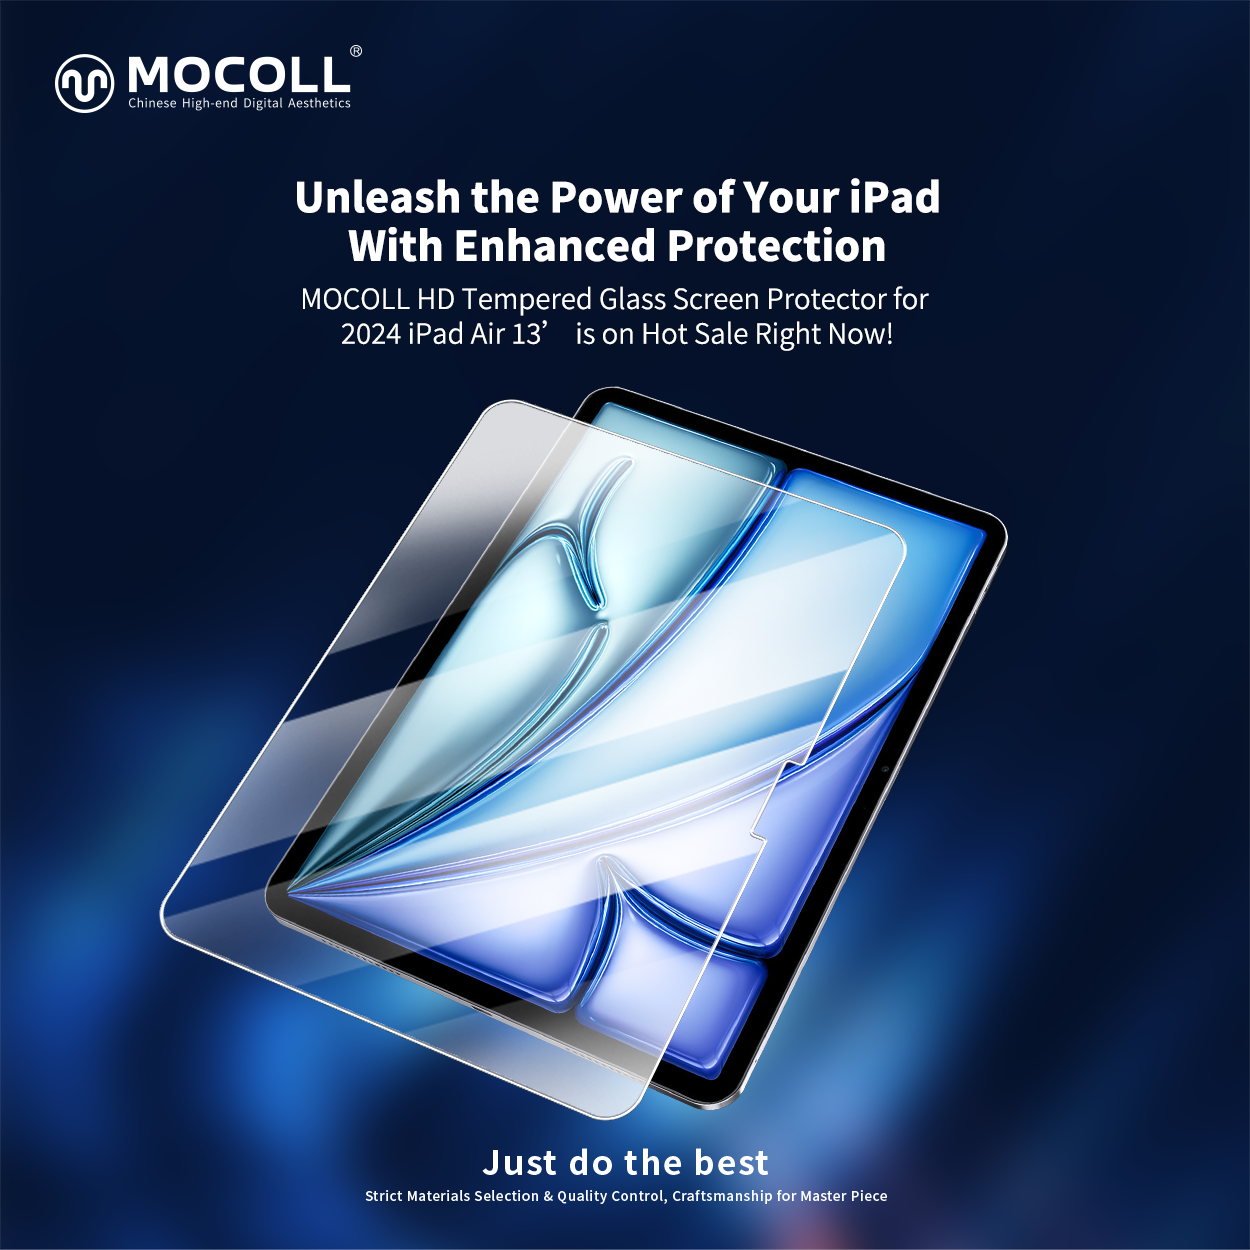 HD tempered glass screen protector for iPad Air 6